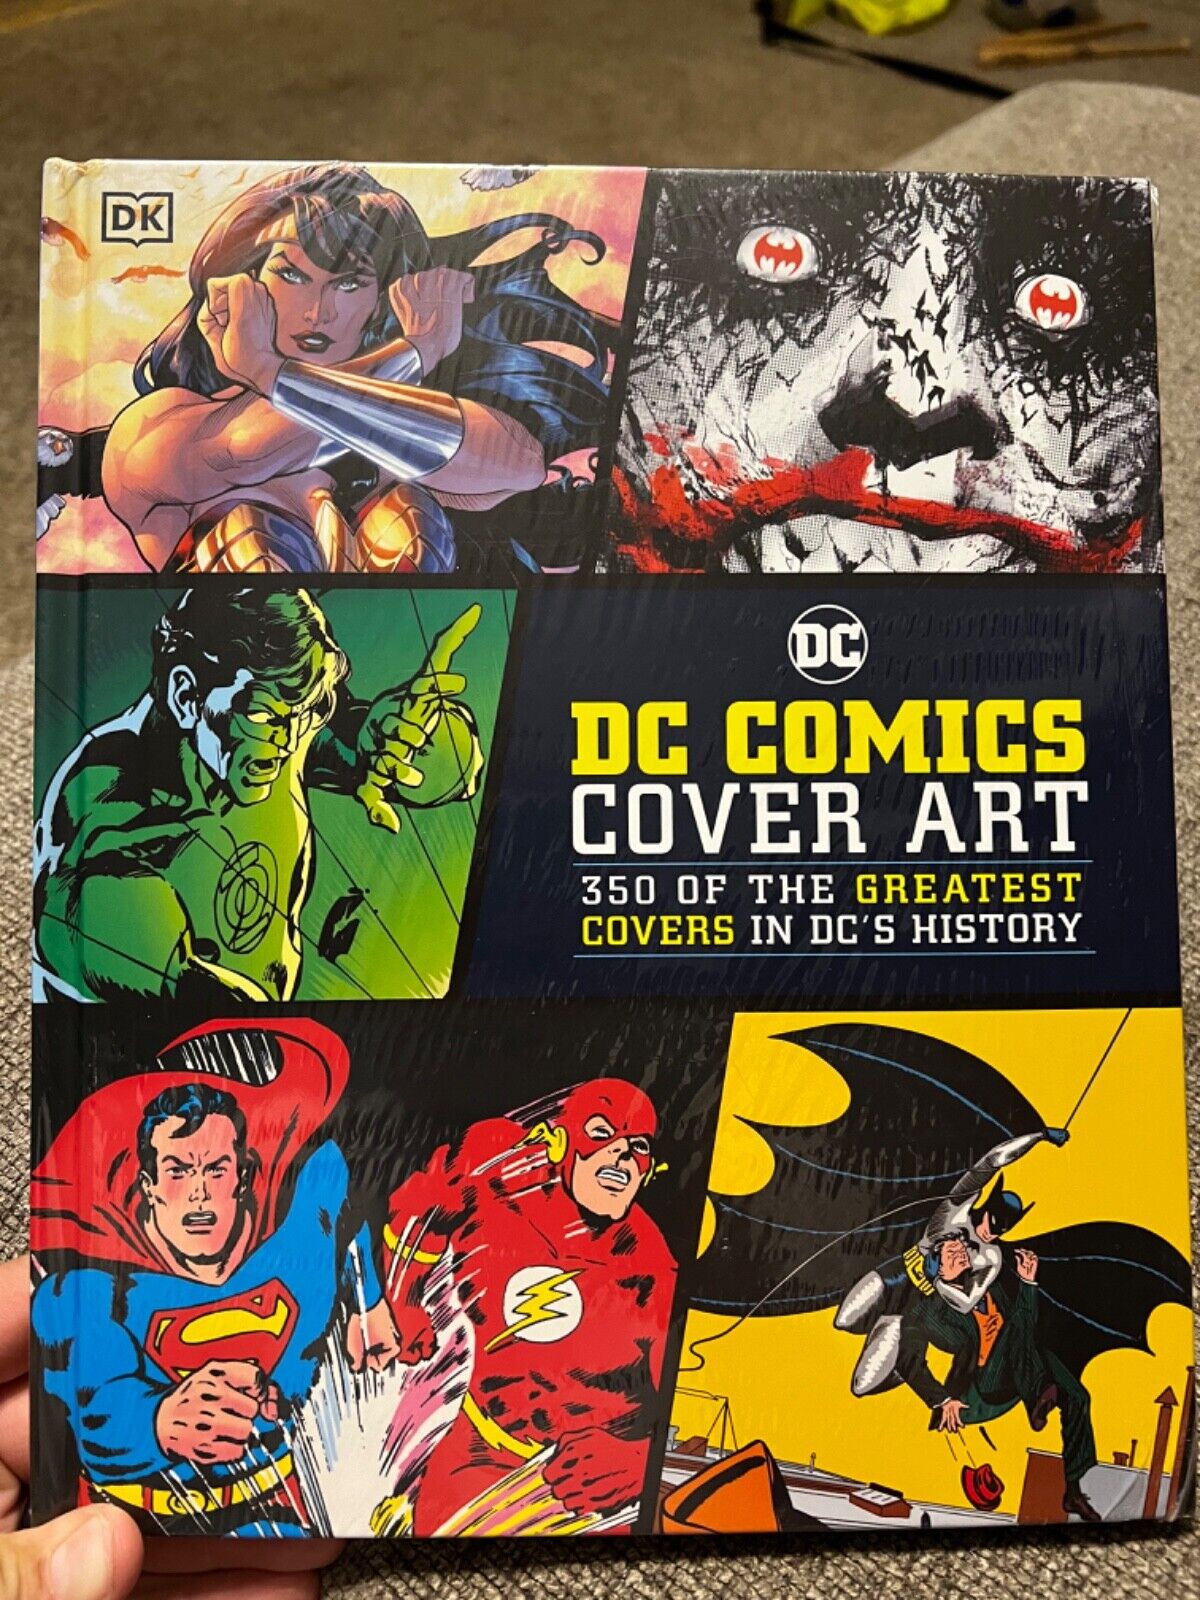 DC Comics Cover Art 350 of Greatest Covers in DC History (DK 2020 Hardcover) NEW